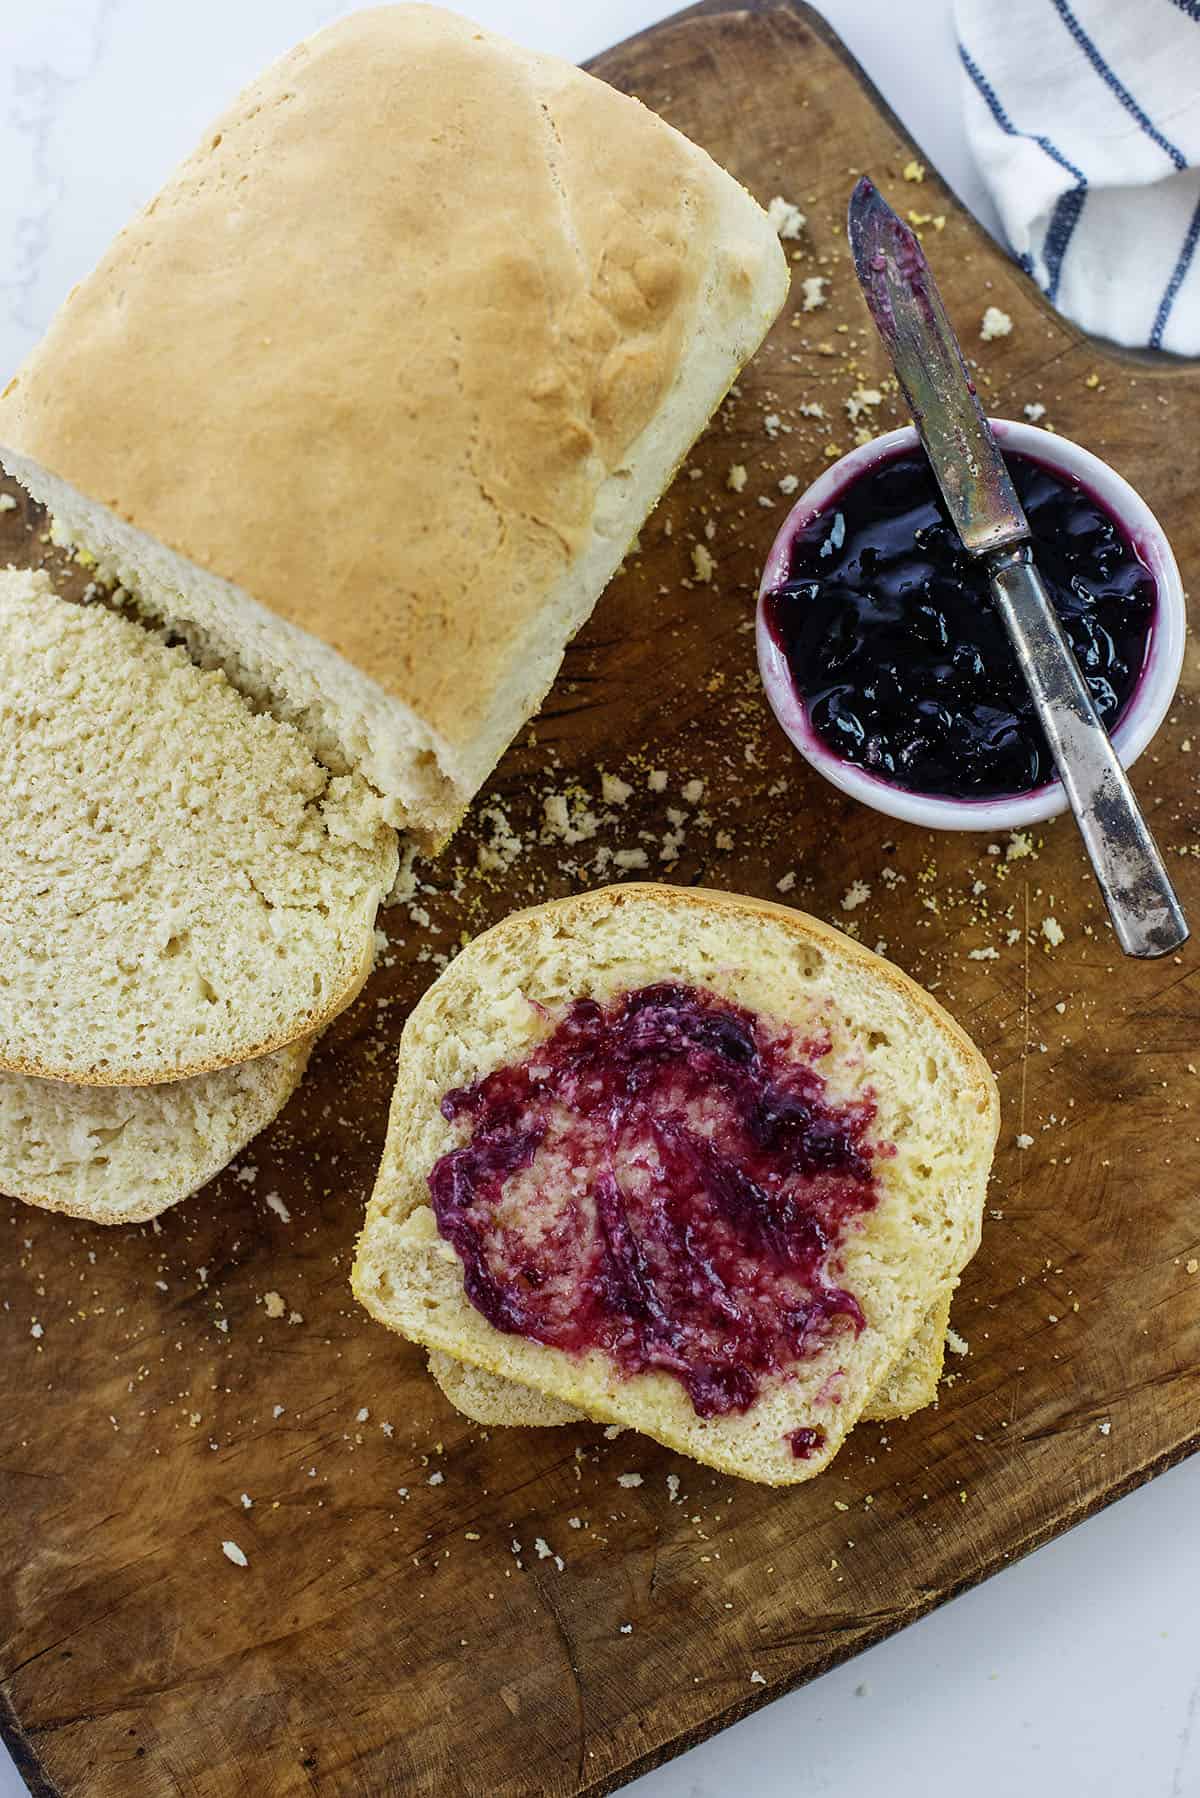 Sliced English muffin bread spread with jam.